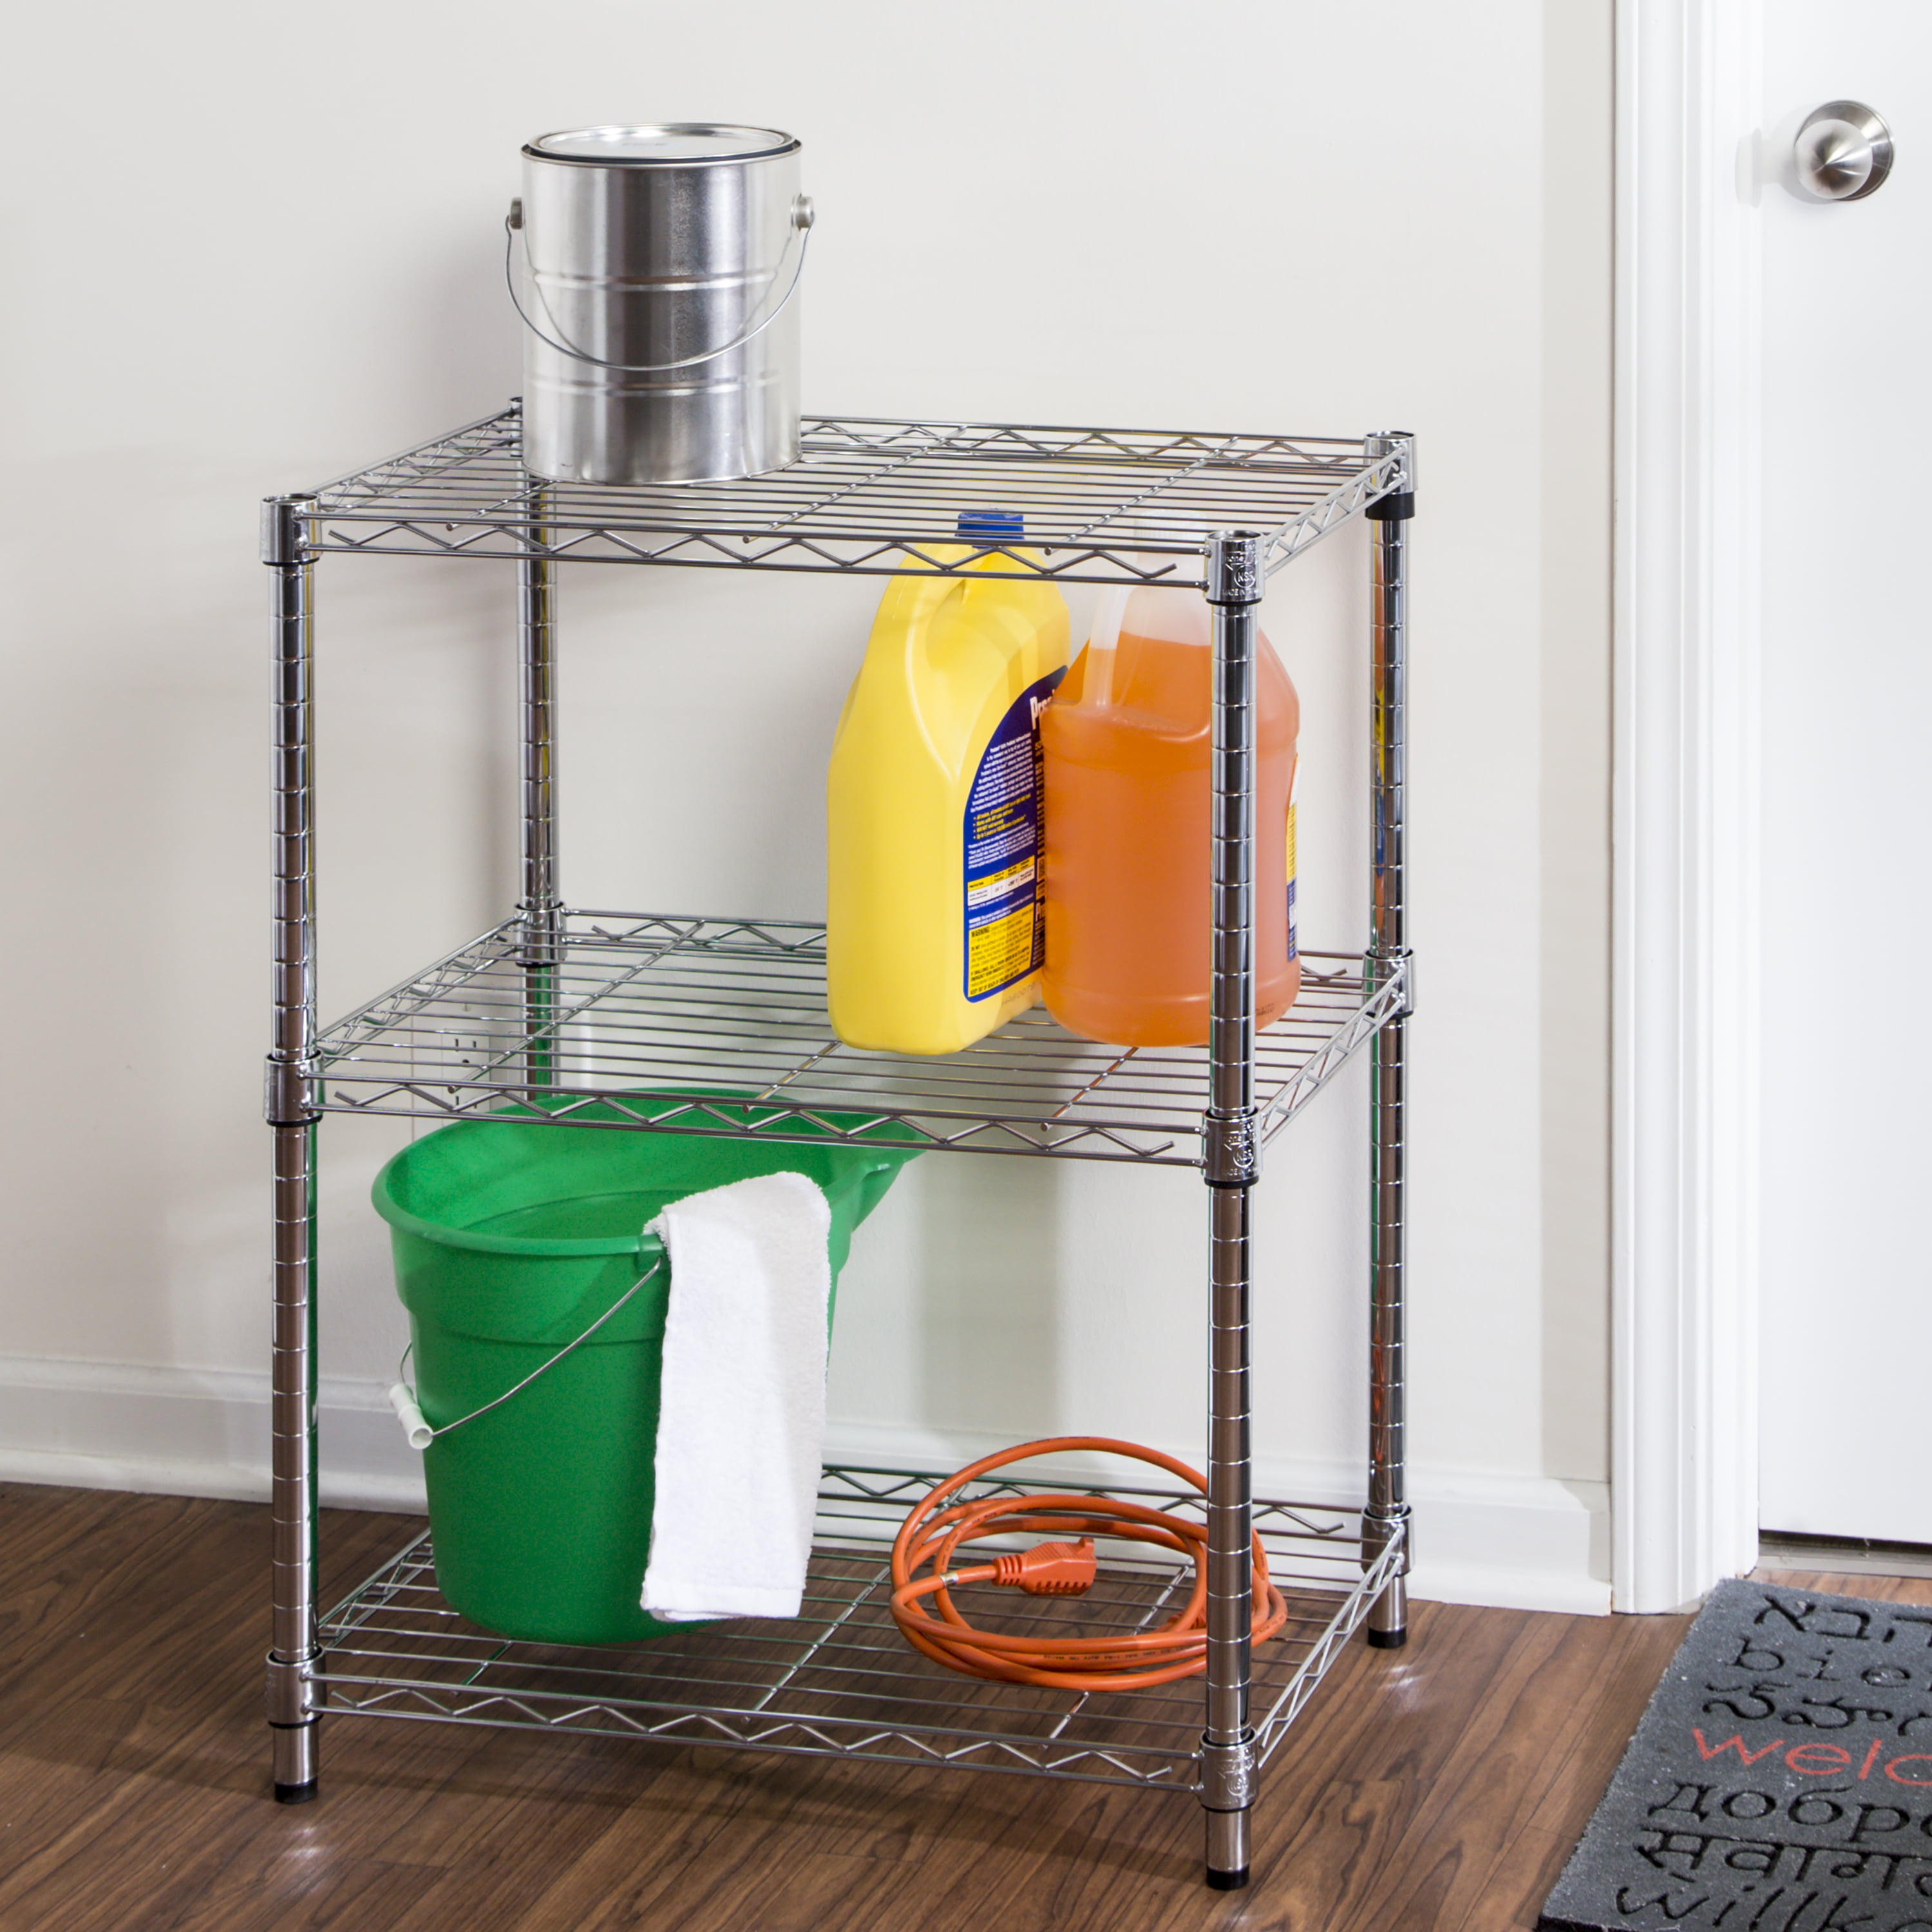 Honey-Can-Do 3-Tier Heavy-Duty Steel Adjustable Shelving Unit, Chrome, Holds up to 250 lb per Shelf - image 3 of 9